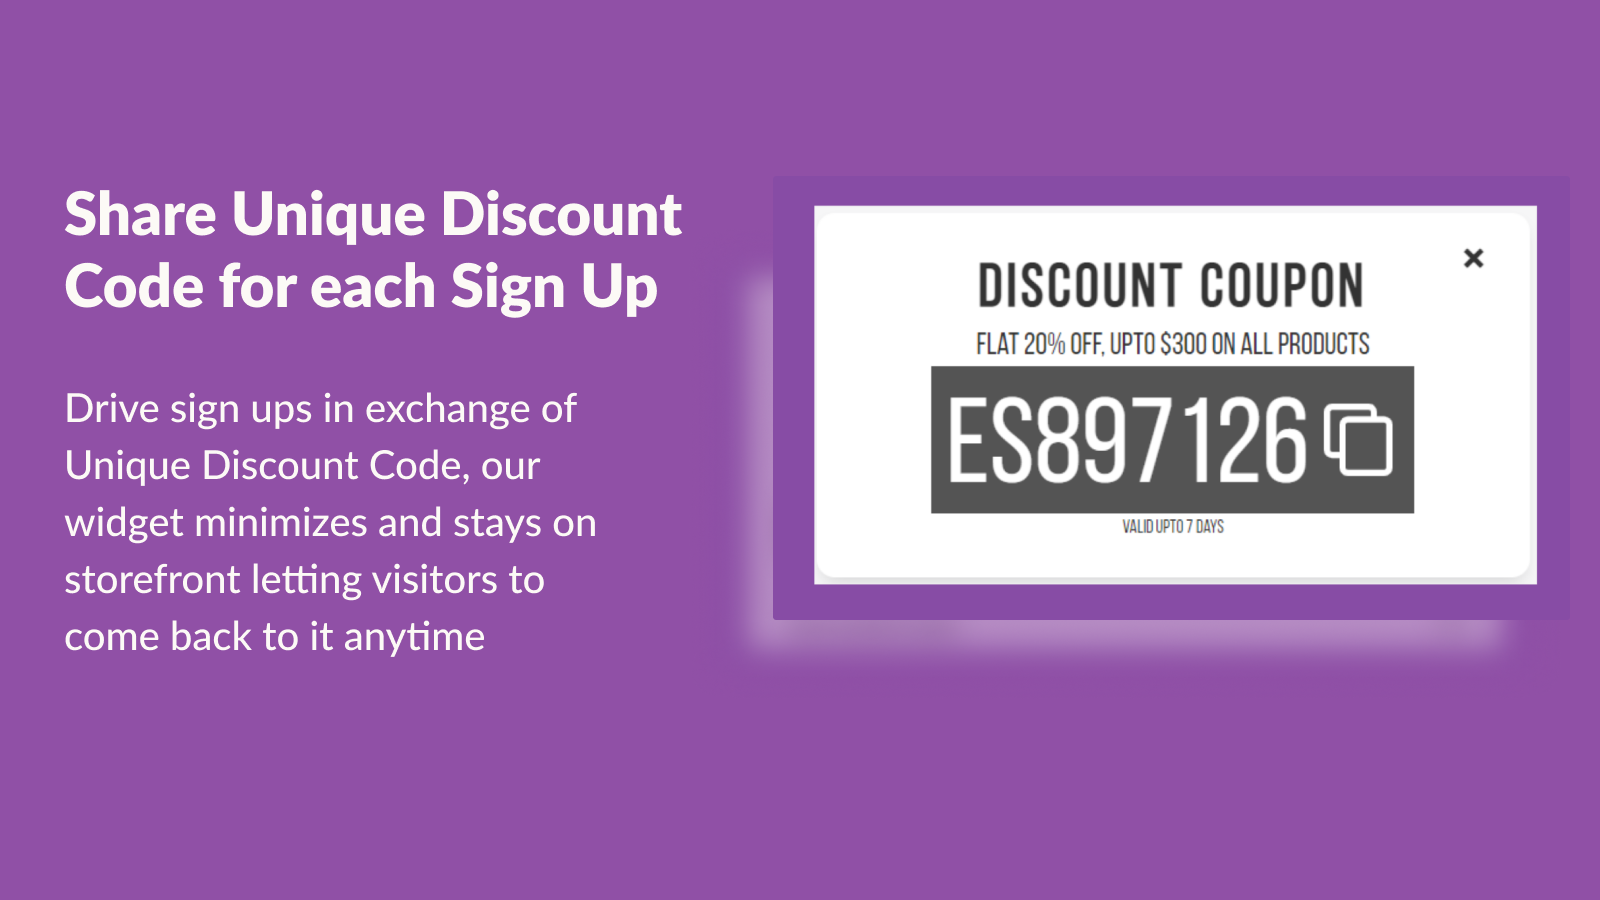 Share unique discount for sign up